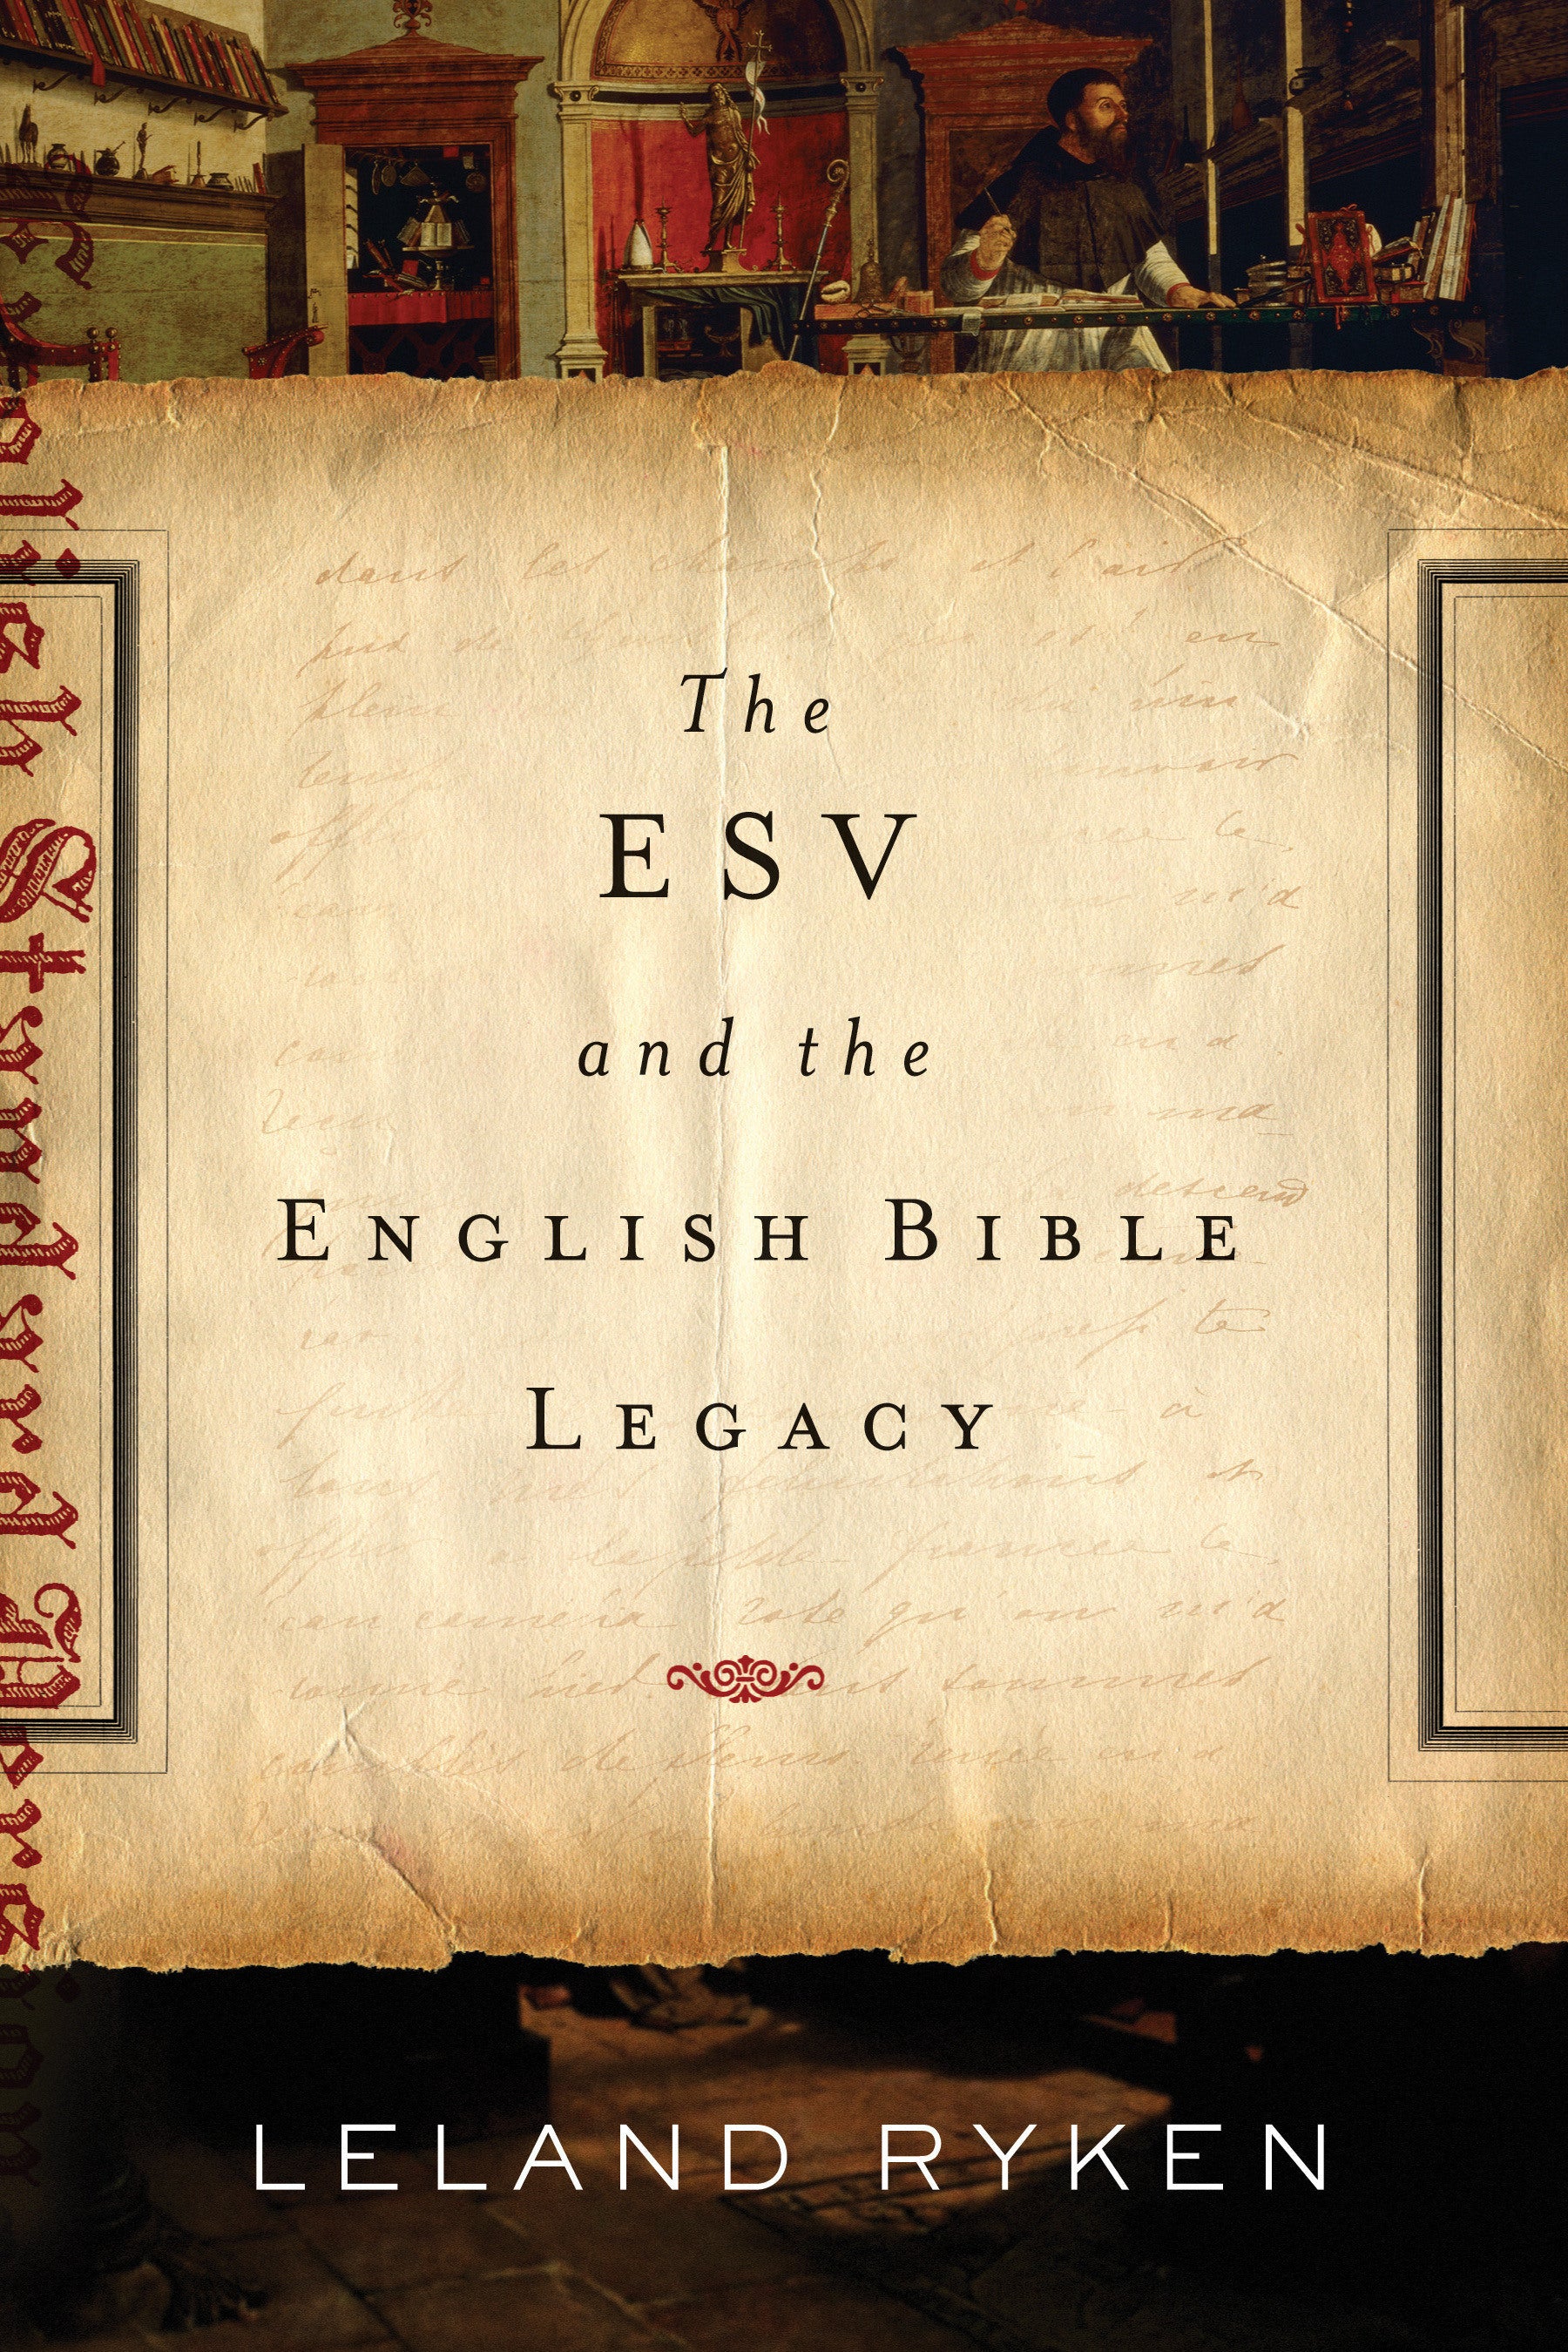 Image of The ESV and the English Bible Legacy other